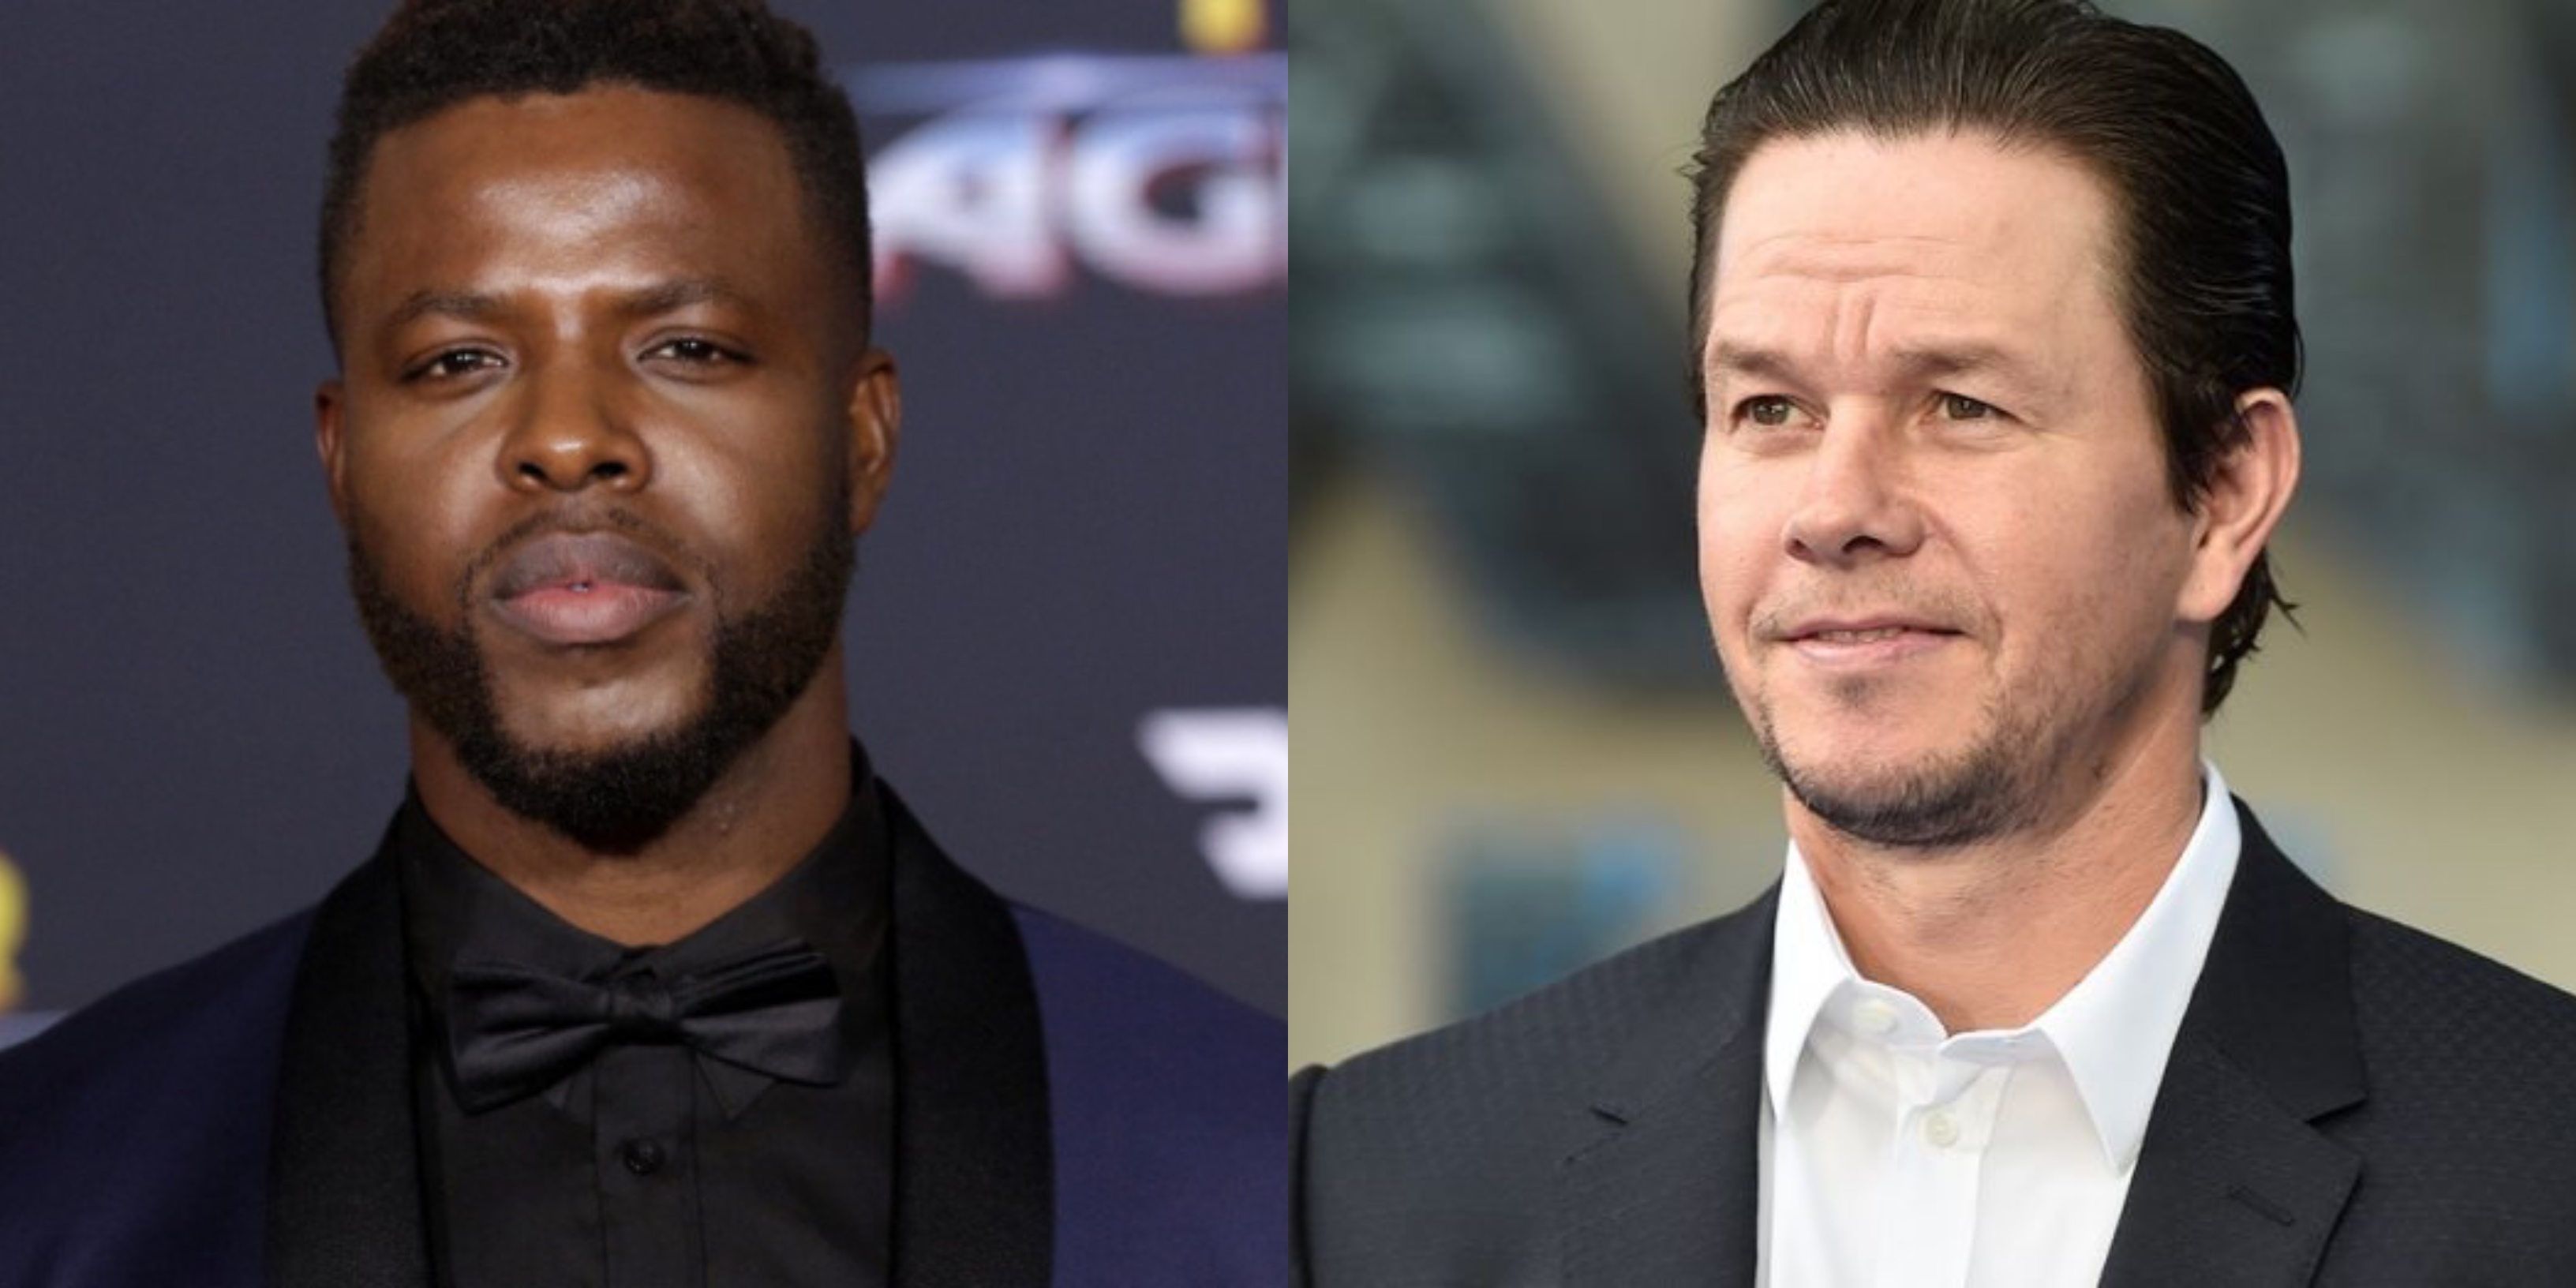 'Black Panther's' Winston Duke to Star With Mark Wahlberg in Netflix's 'Wonderland'